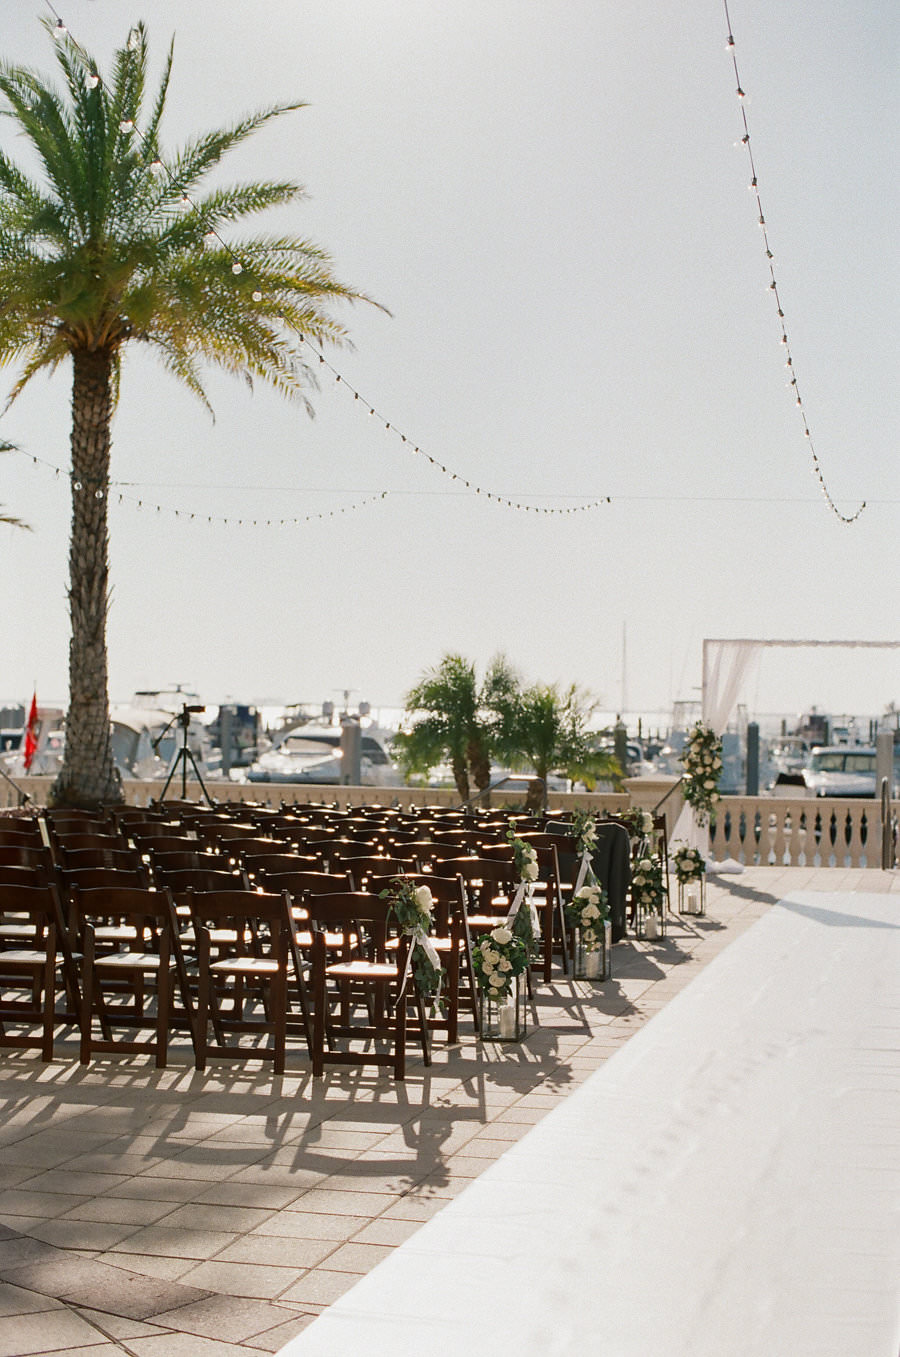 Outdoor Waterfront Wedding Ceremony with Wooden Folding Chairs, White and Greenery Florals, and White Draped Ceremony arch and String Lights | Tampa Bay Wedding Venue Westshore Yacht Club | Planner Unique Weddings and Events